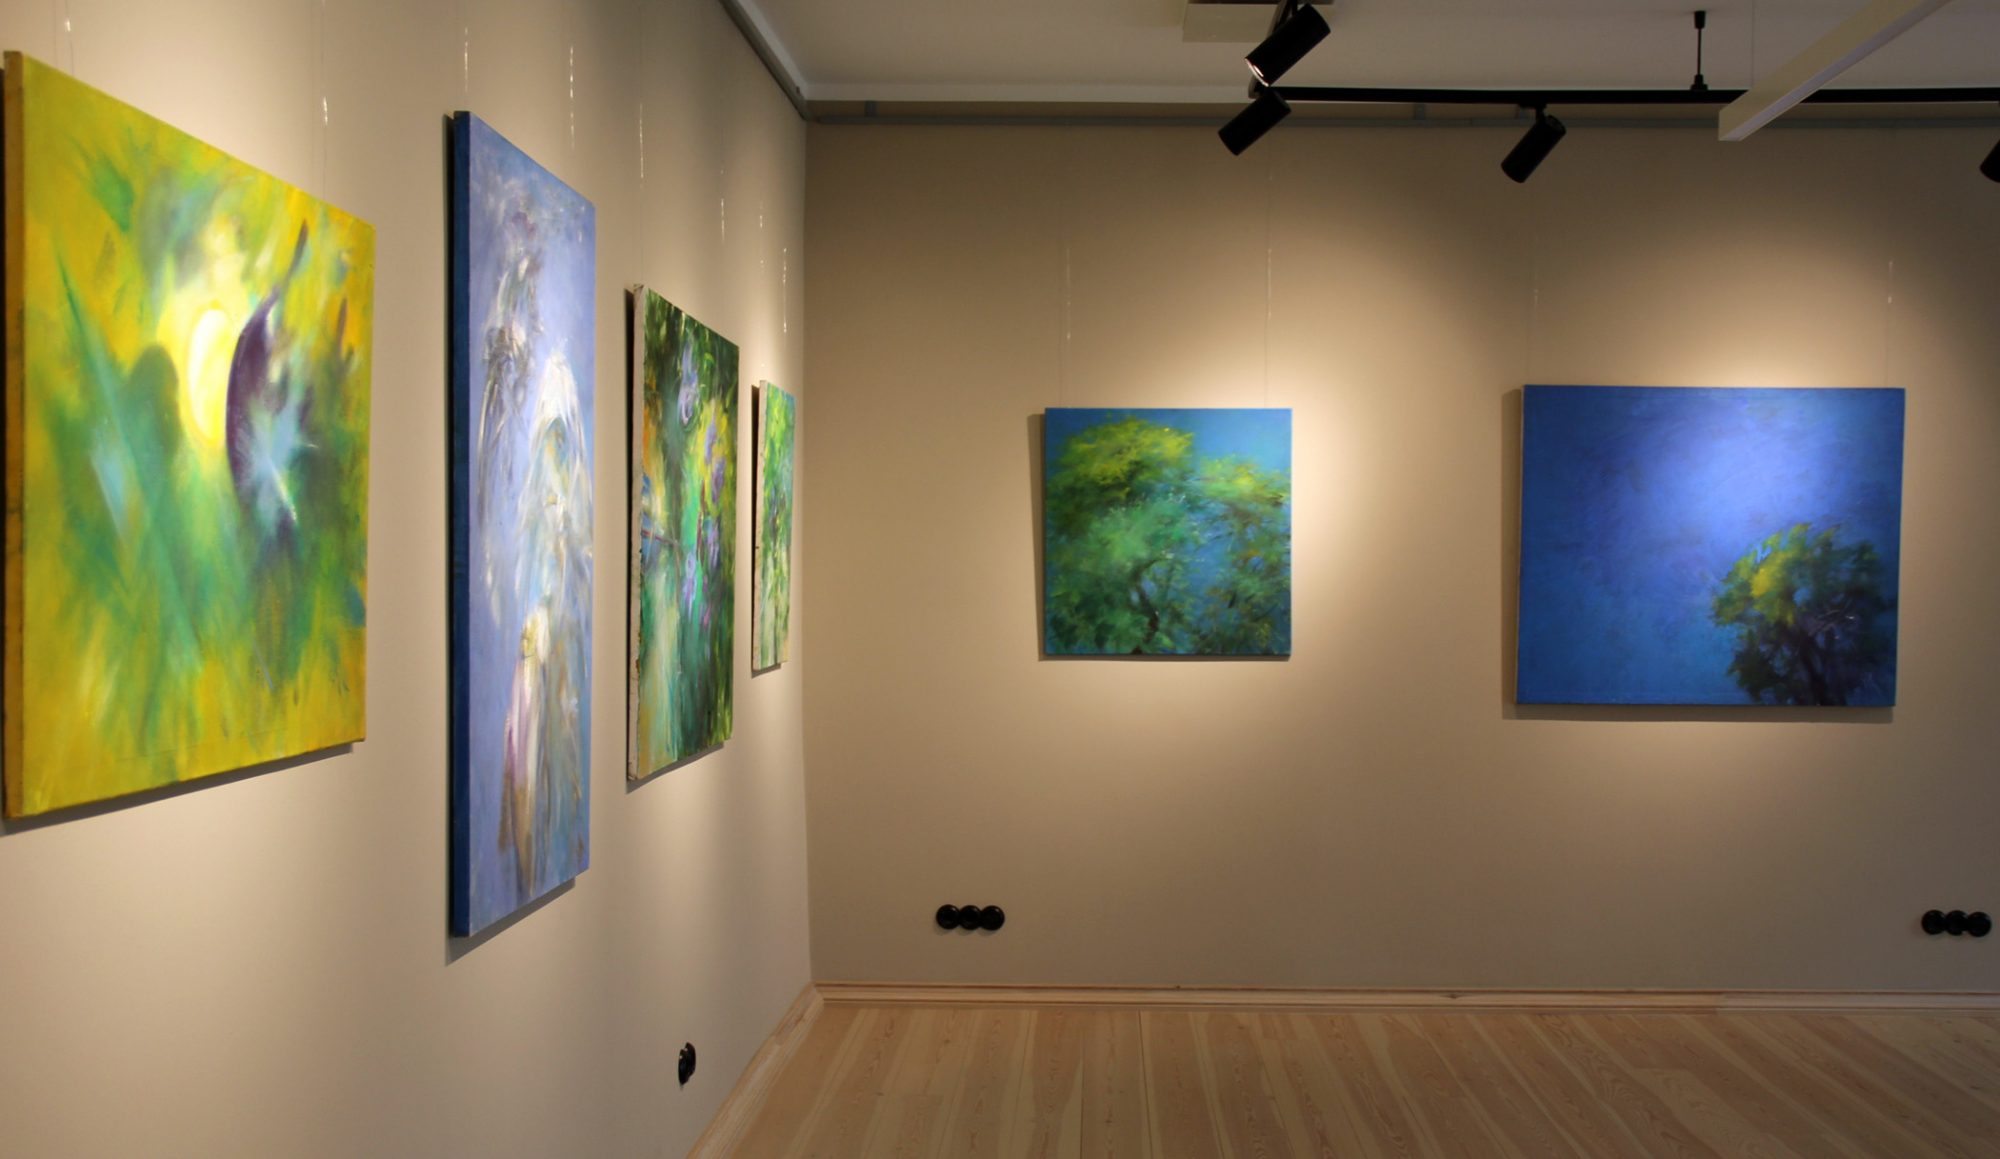 Exhibition “I’m looking at the sun”